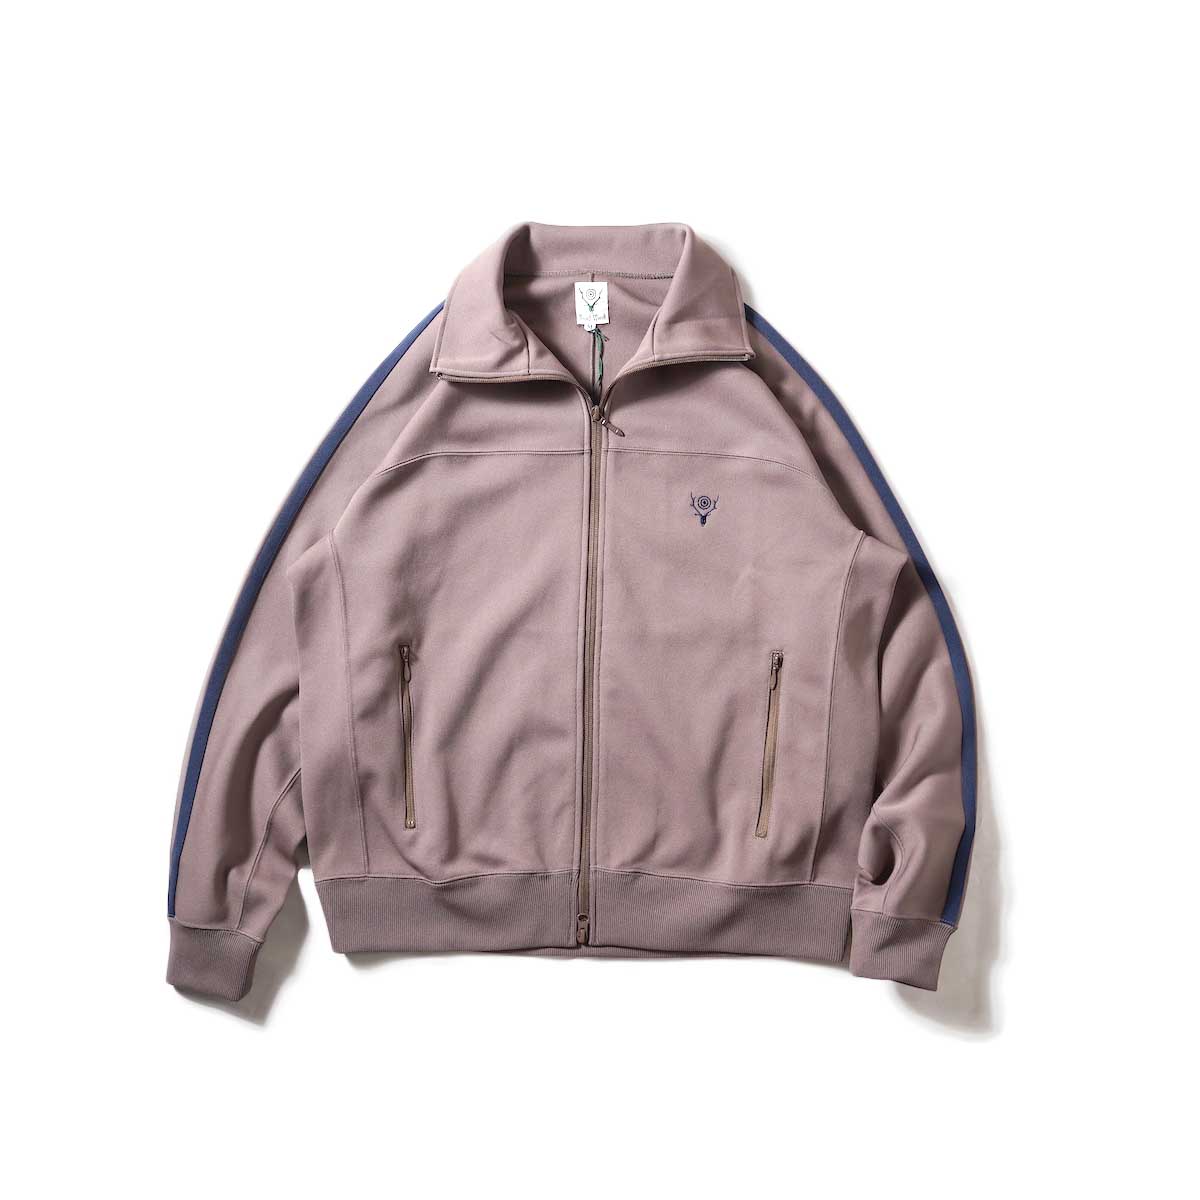 South2 West8 / Trainer Jacket - Poly Smooth (Taupe)